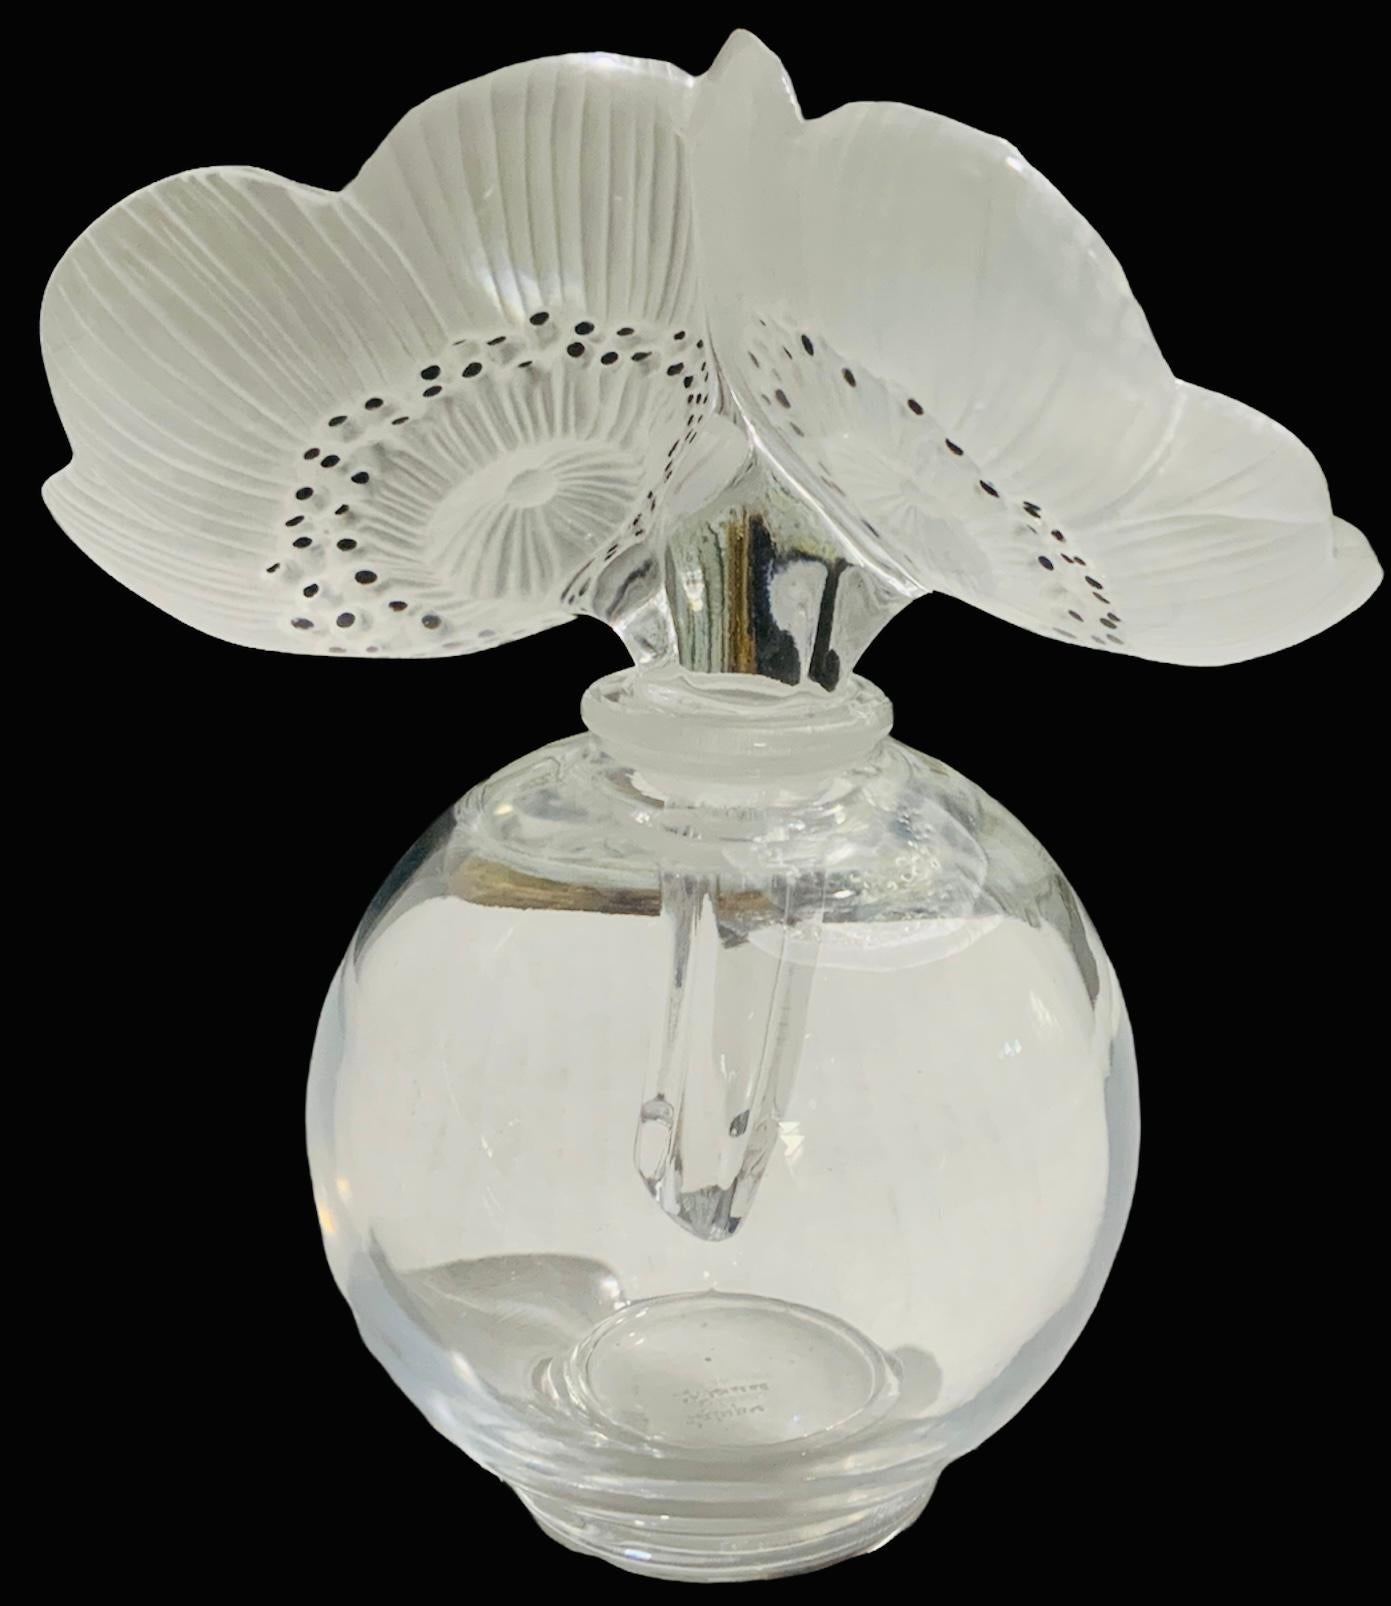 This is a Lalique clear and frosted crystal double anemones large flowers vase. It depicts a bouquet of two anemones flowers as the stopper of a clear rounded vase. Black enamel covers some dots in the center of the flowers. The anemone flower